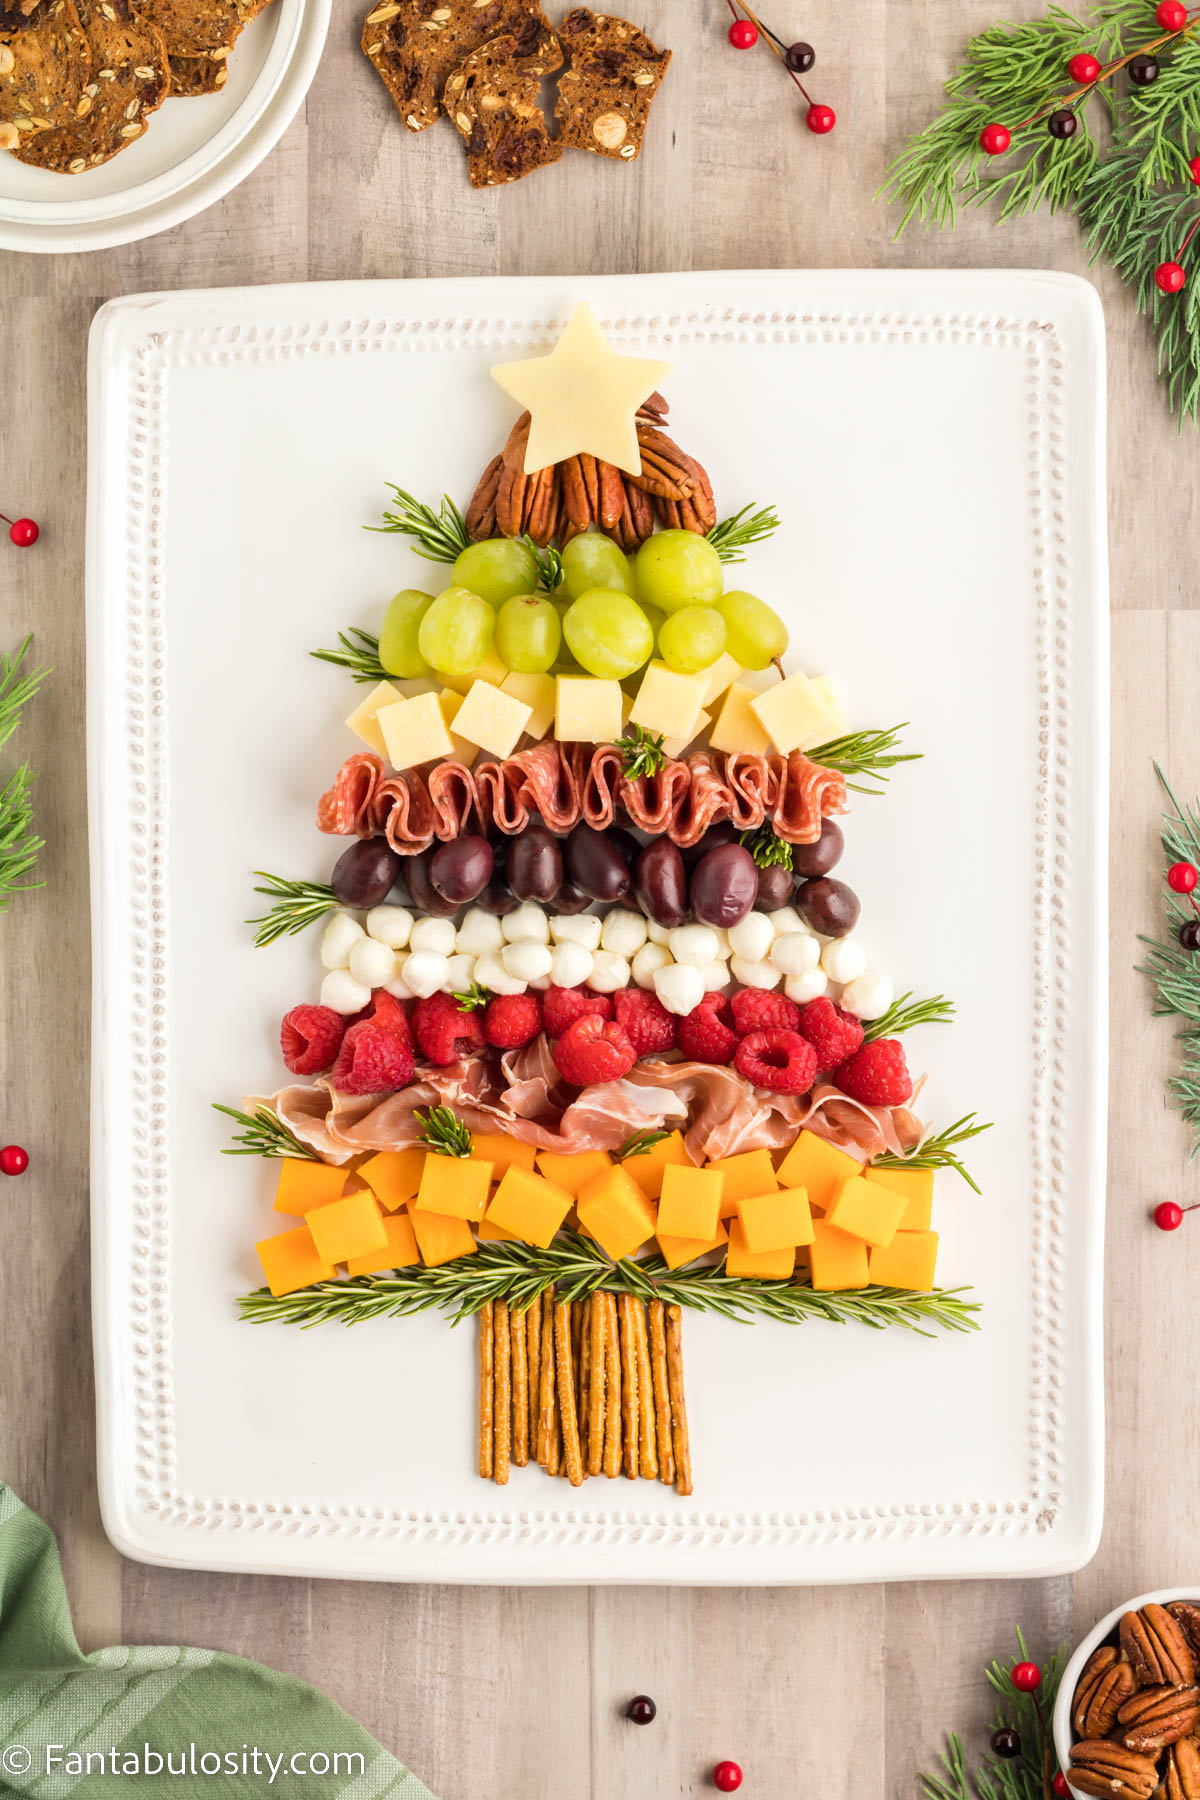 Nuts, fruits, meats and cheeses have been arranged in the shape of a Christmas tree on a white rectangular serving platter